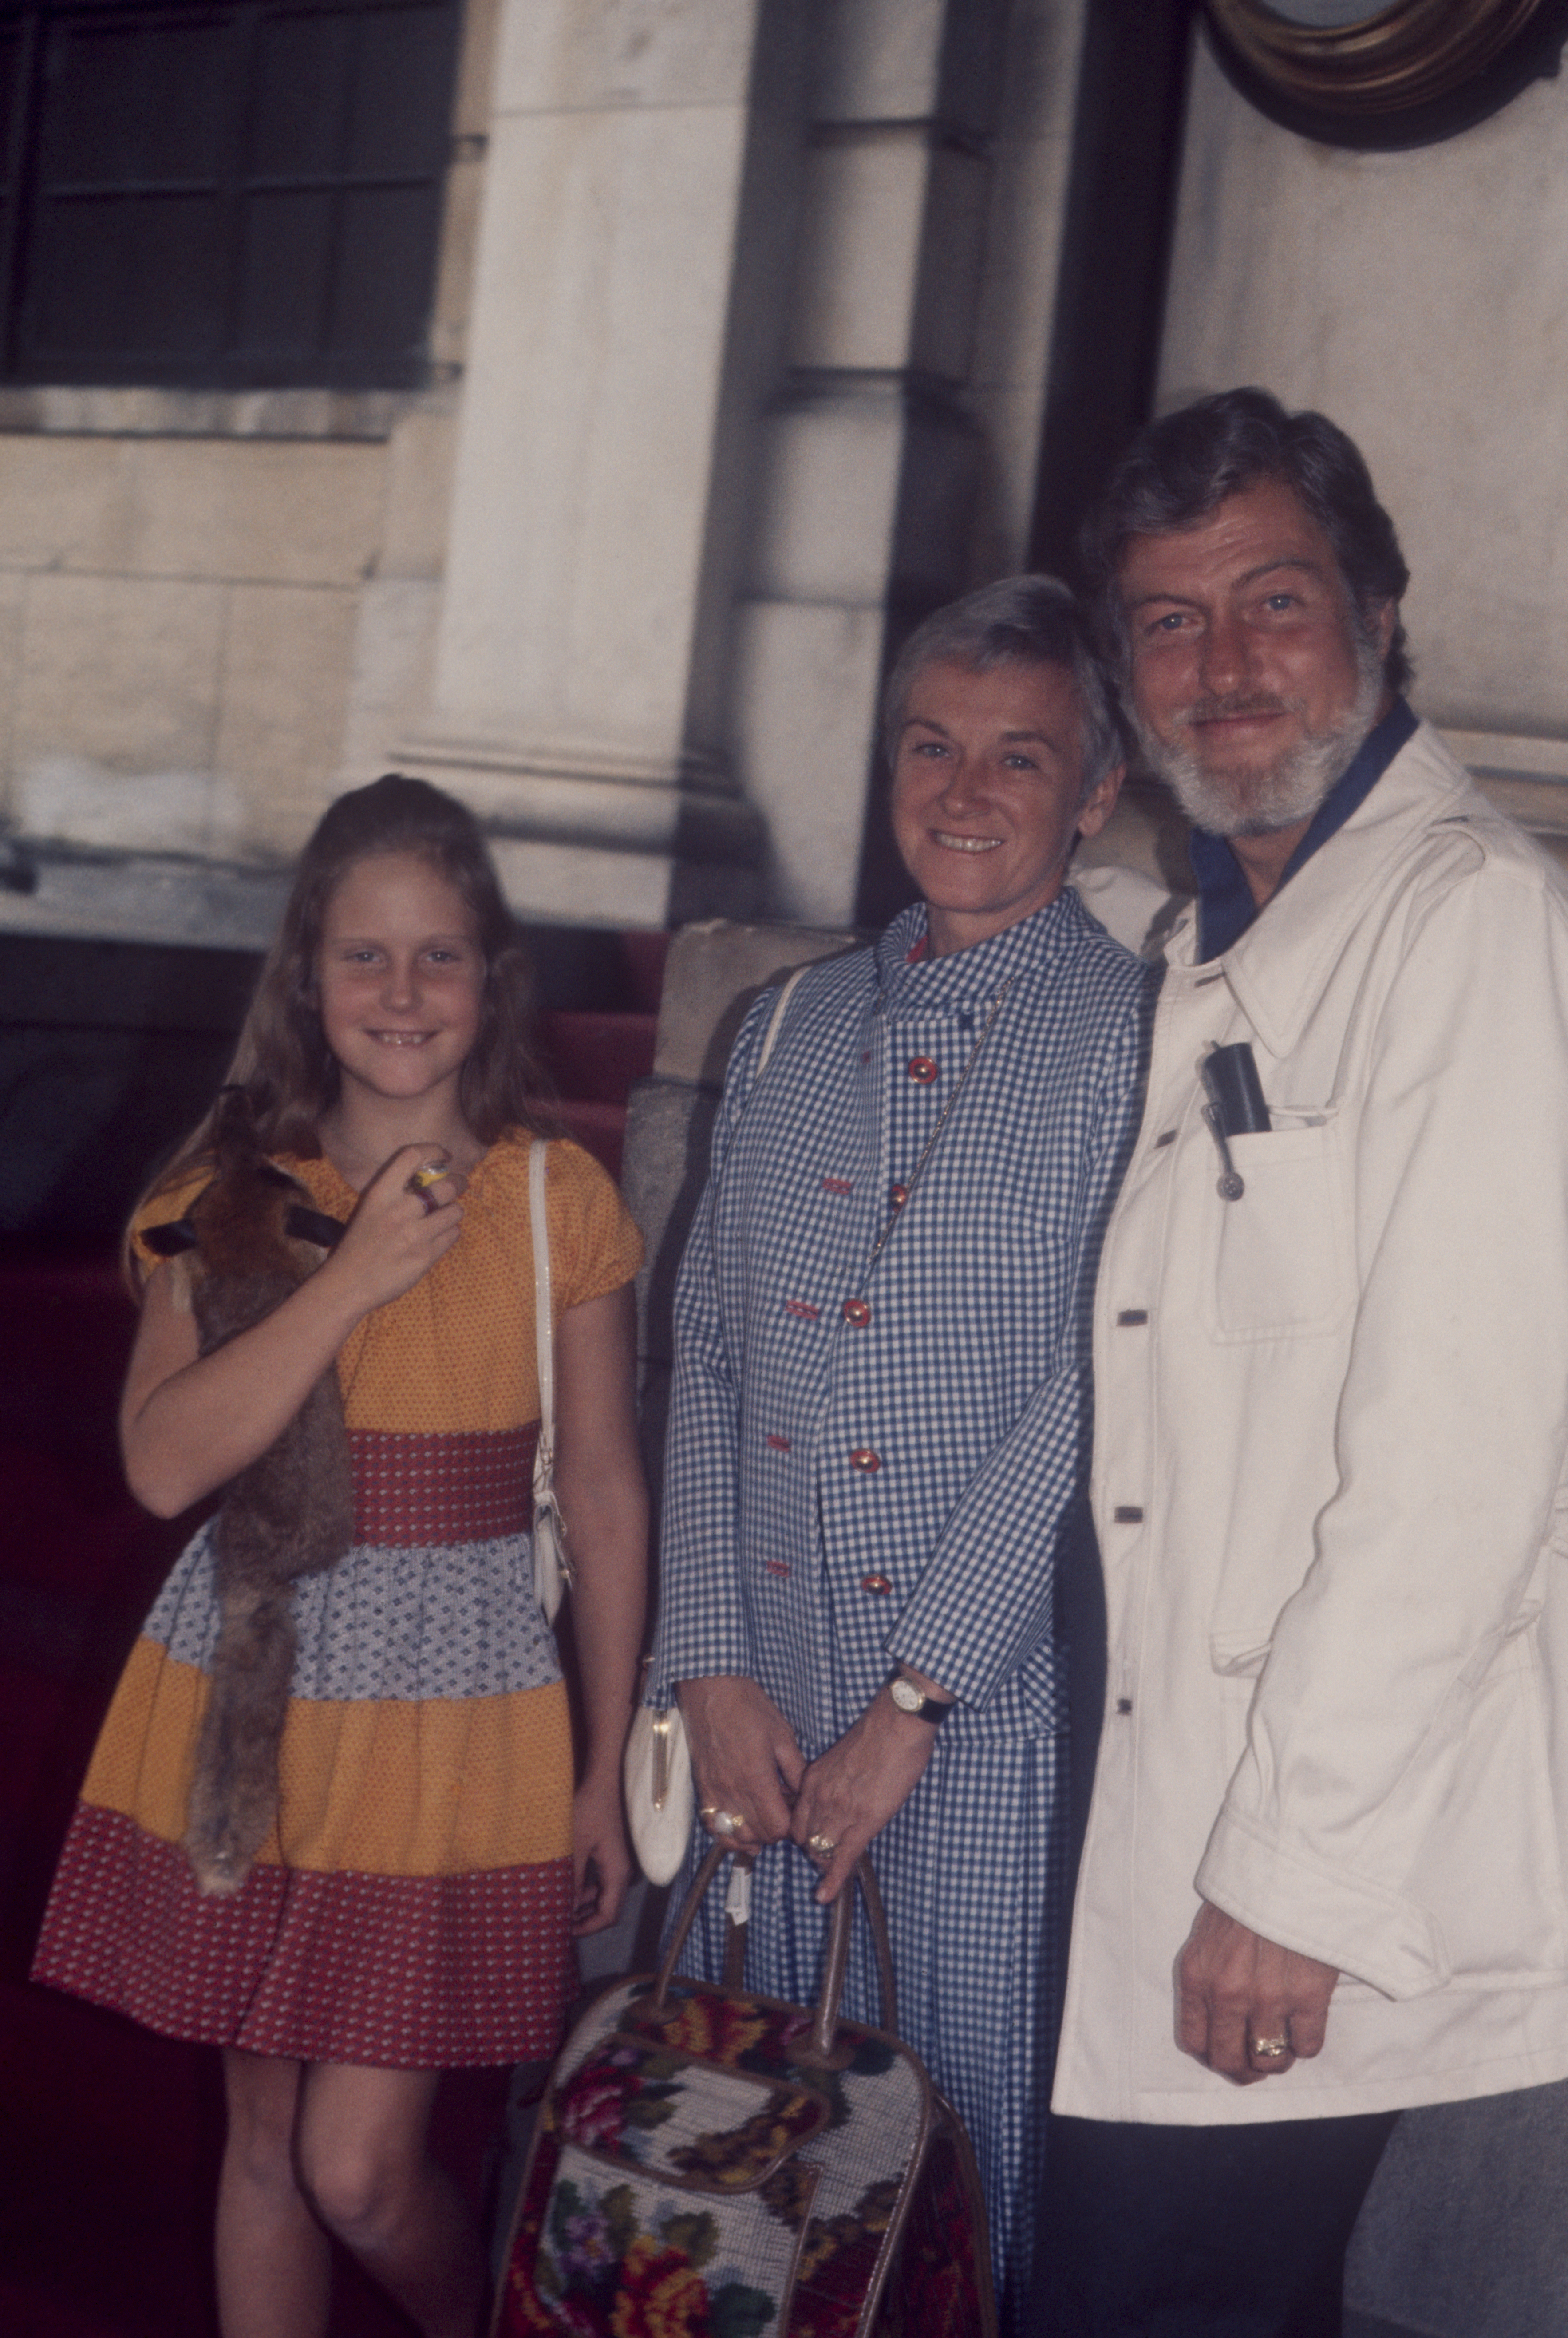 Dick Van Dyke and Margie Willet Van Dyke with their daughter casual street photograph; circa 1970; New York. | Source: Getty Images